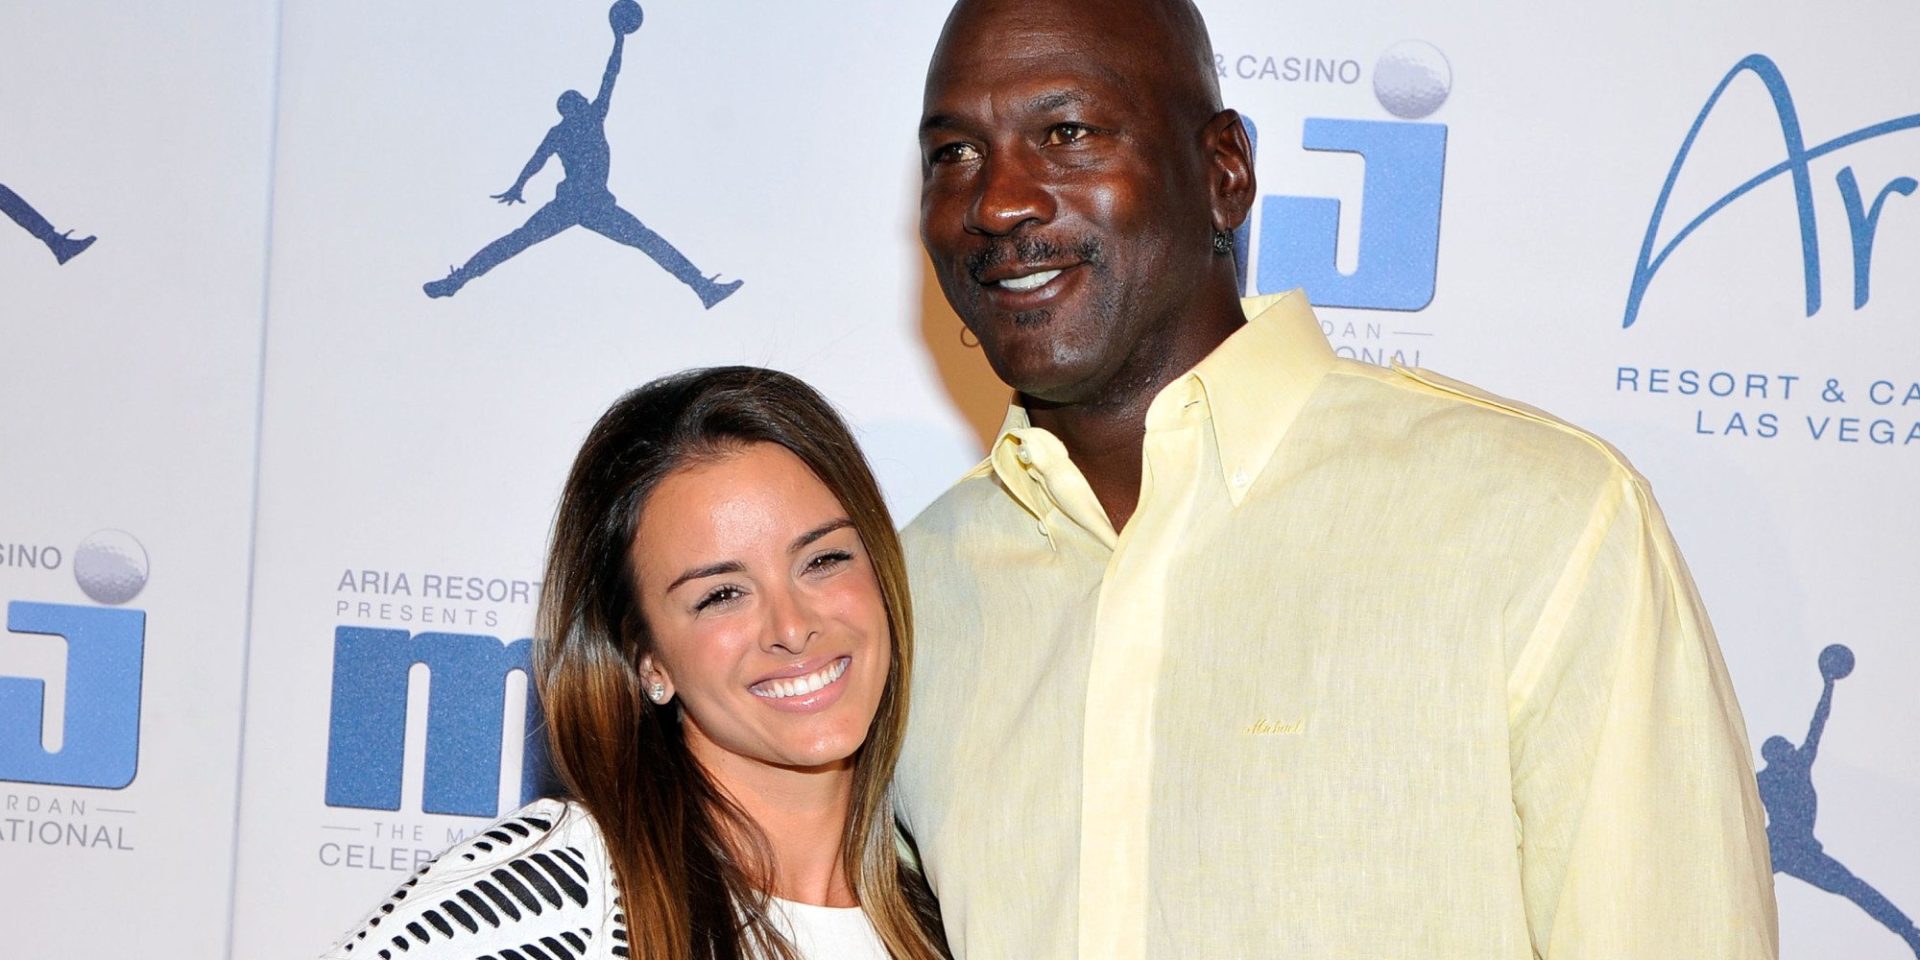 Michael Jordans Love Story With Wife Yvette Prieto Since Divorce From Ex Wife Juanita 